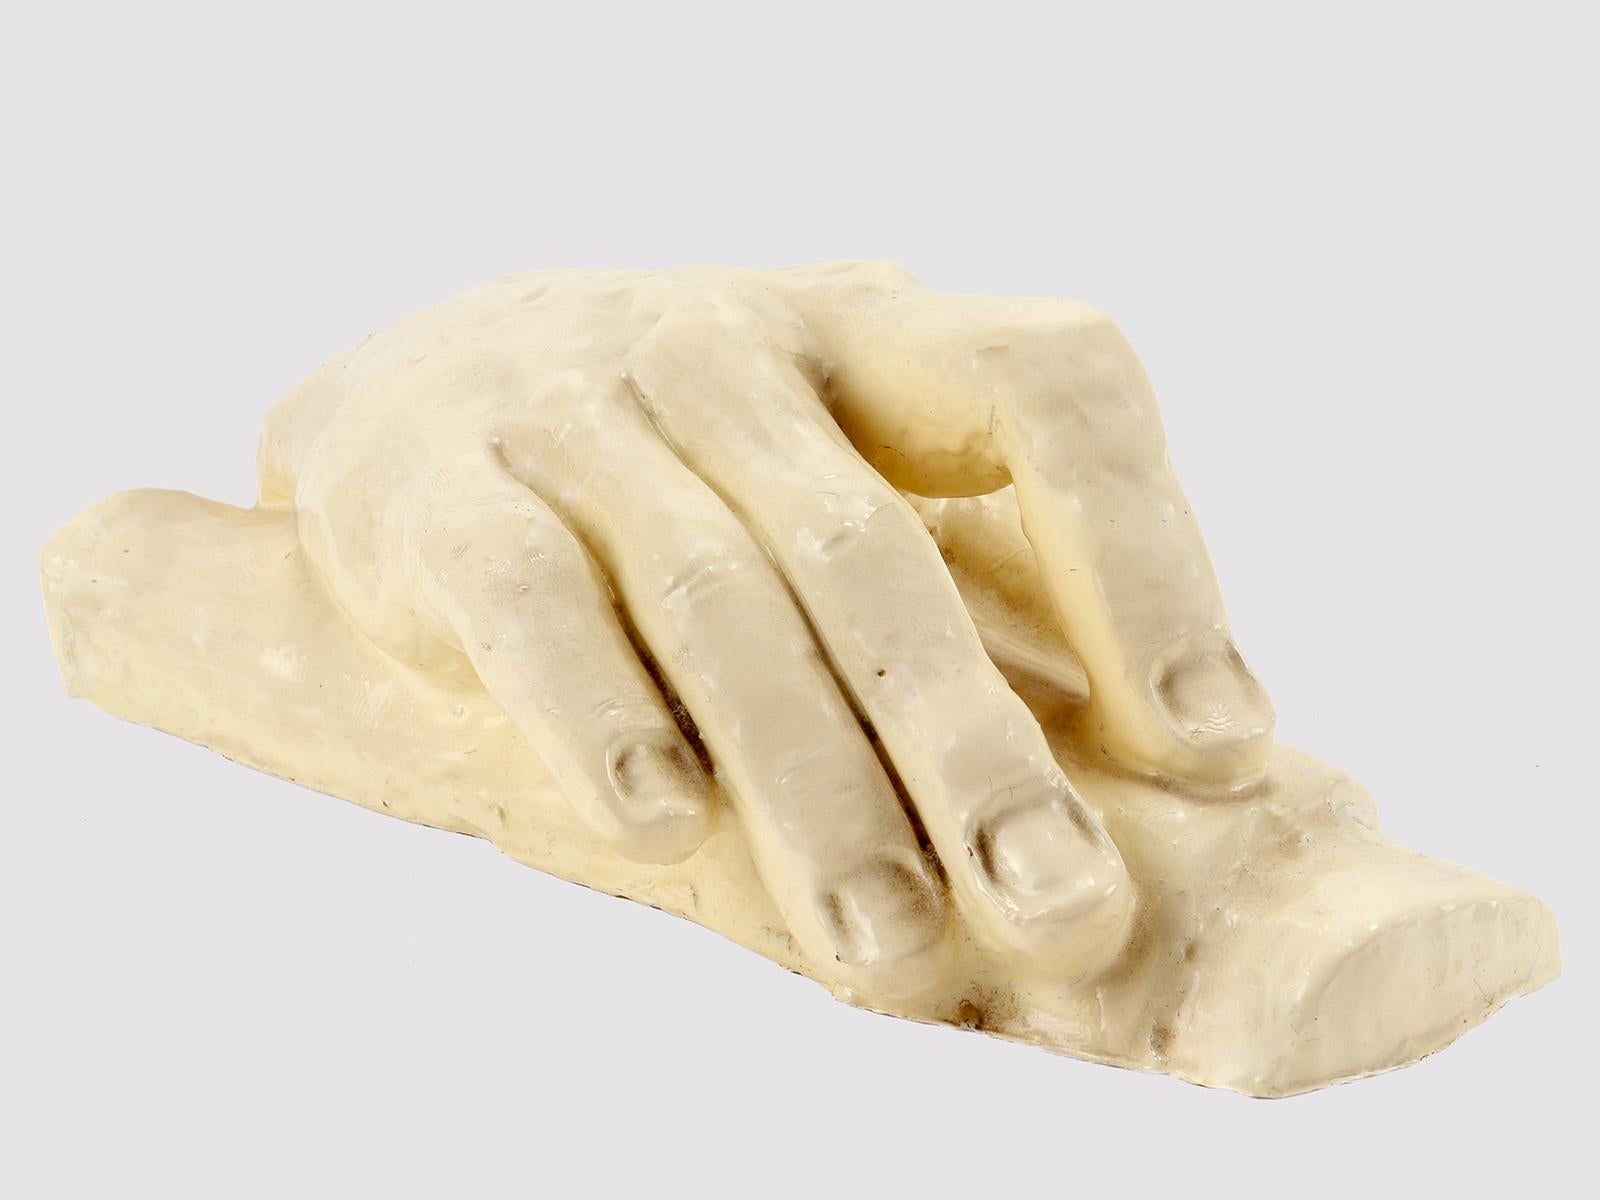 Sculpture in gray terracotta glazed in white, depicting a hand. The sculpture is obtained by gradually adding individual terracotta elements by hand. The hand is an example of sculptural excellence in both movement and detail. The sculpture is